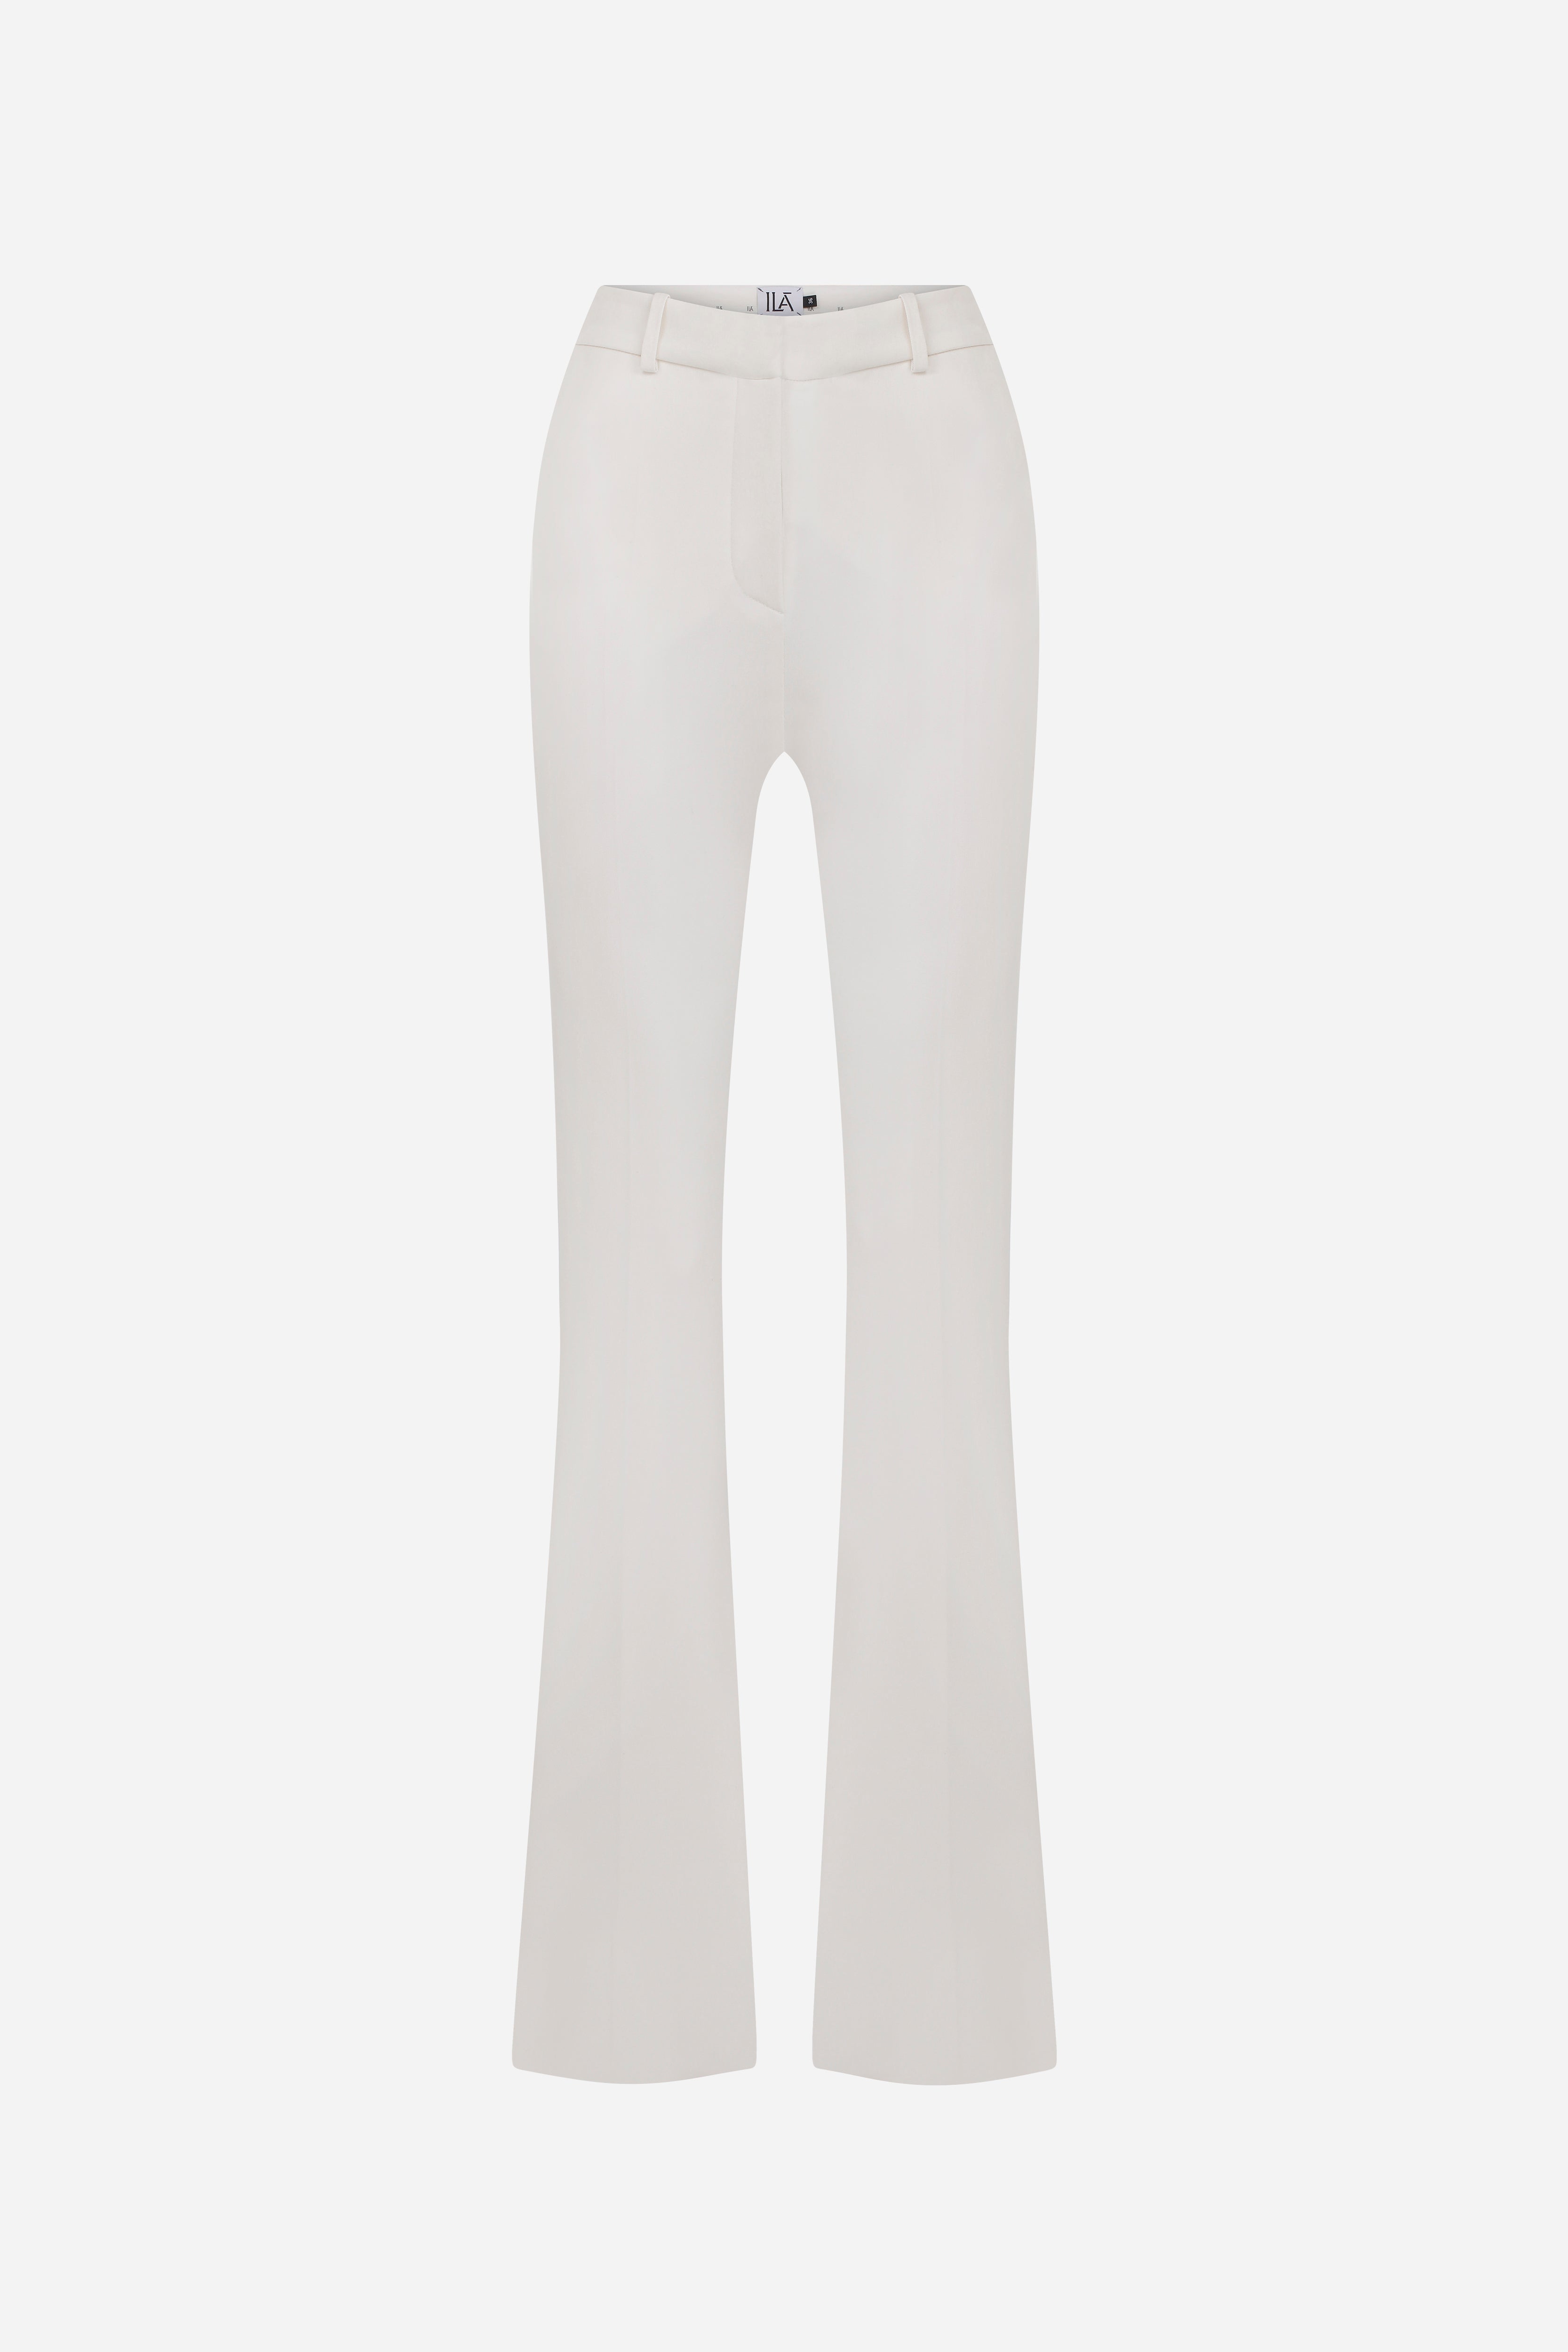 Blake - Mid Flare Trousers